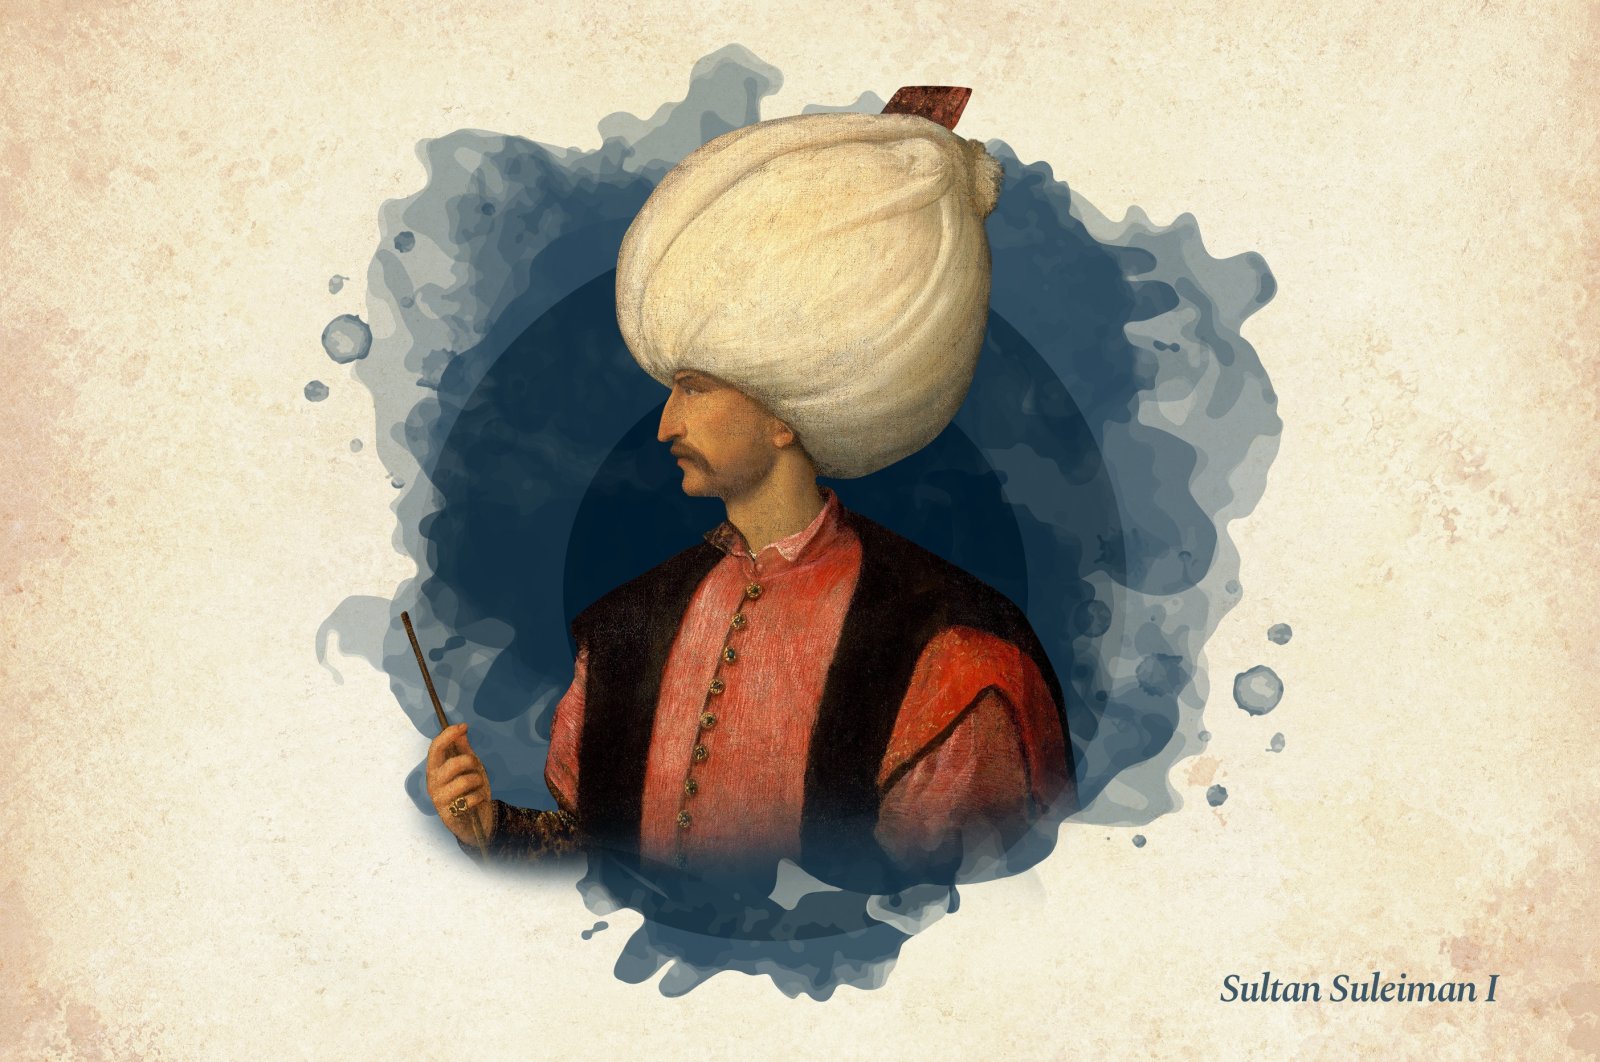 This widely used illustration painted by Italian painter Titian shows Sultan Suleiman, the 10th ruler of the Ottoman Empire. (Wikimedia / edited by Büşra Öztürk)